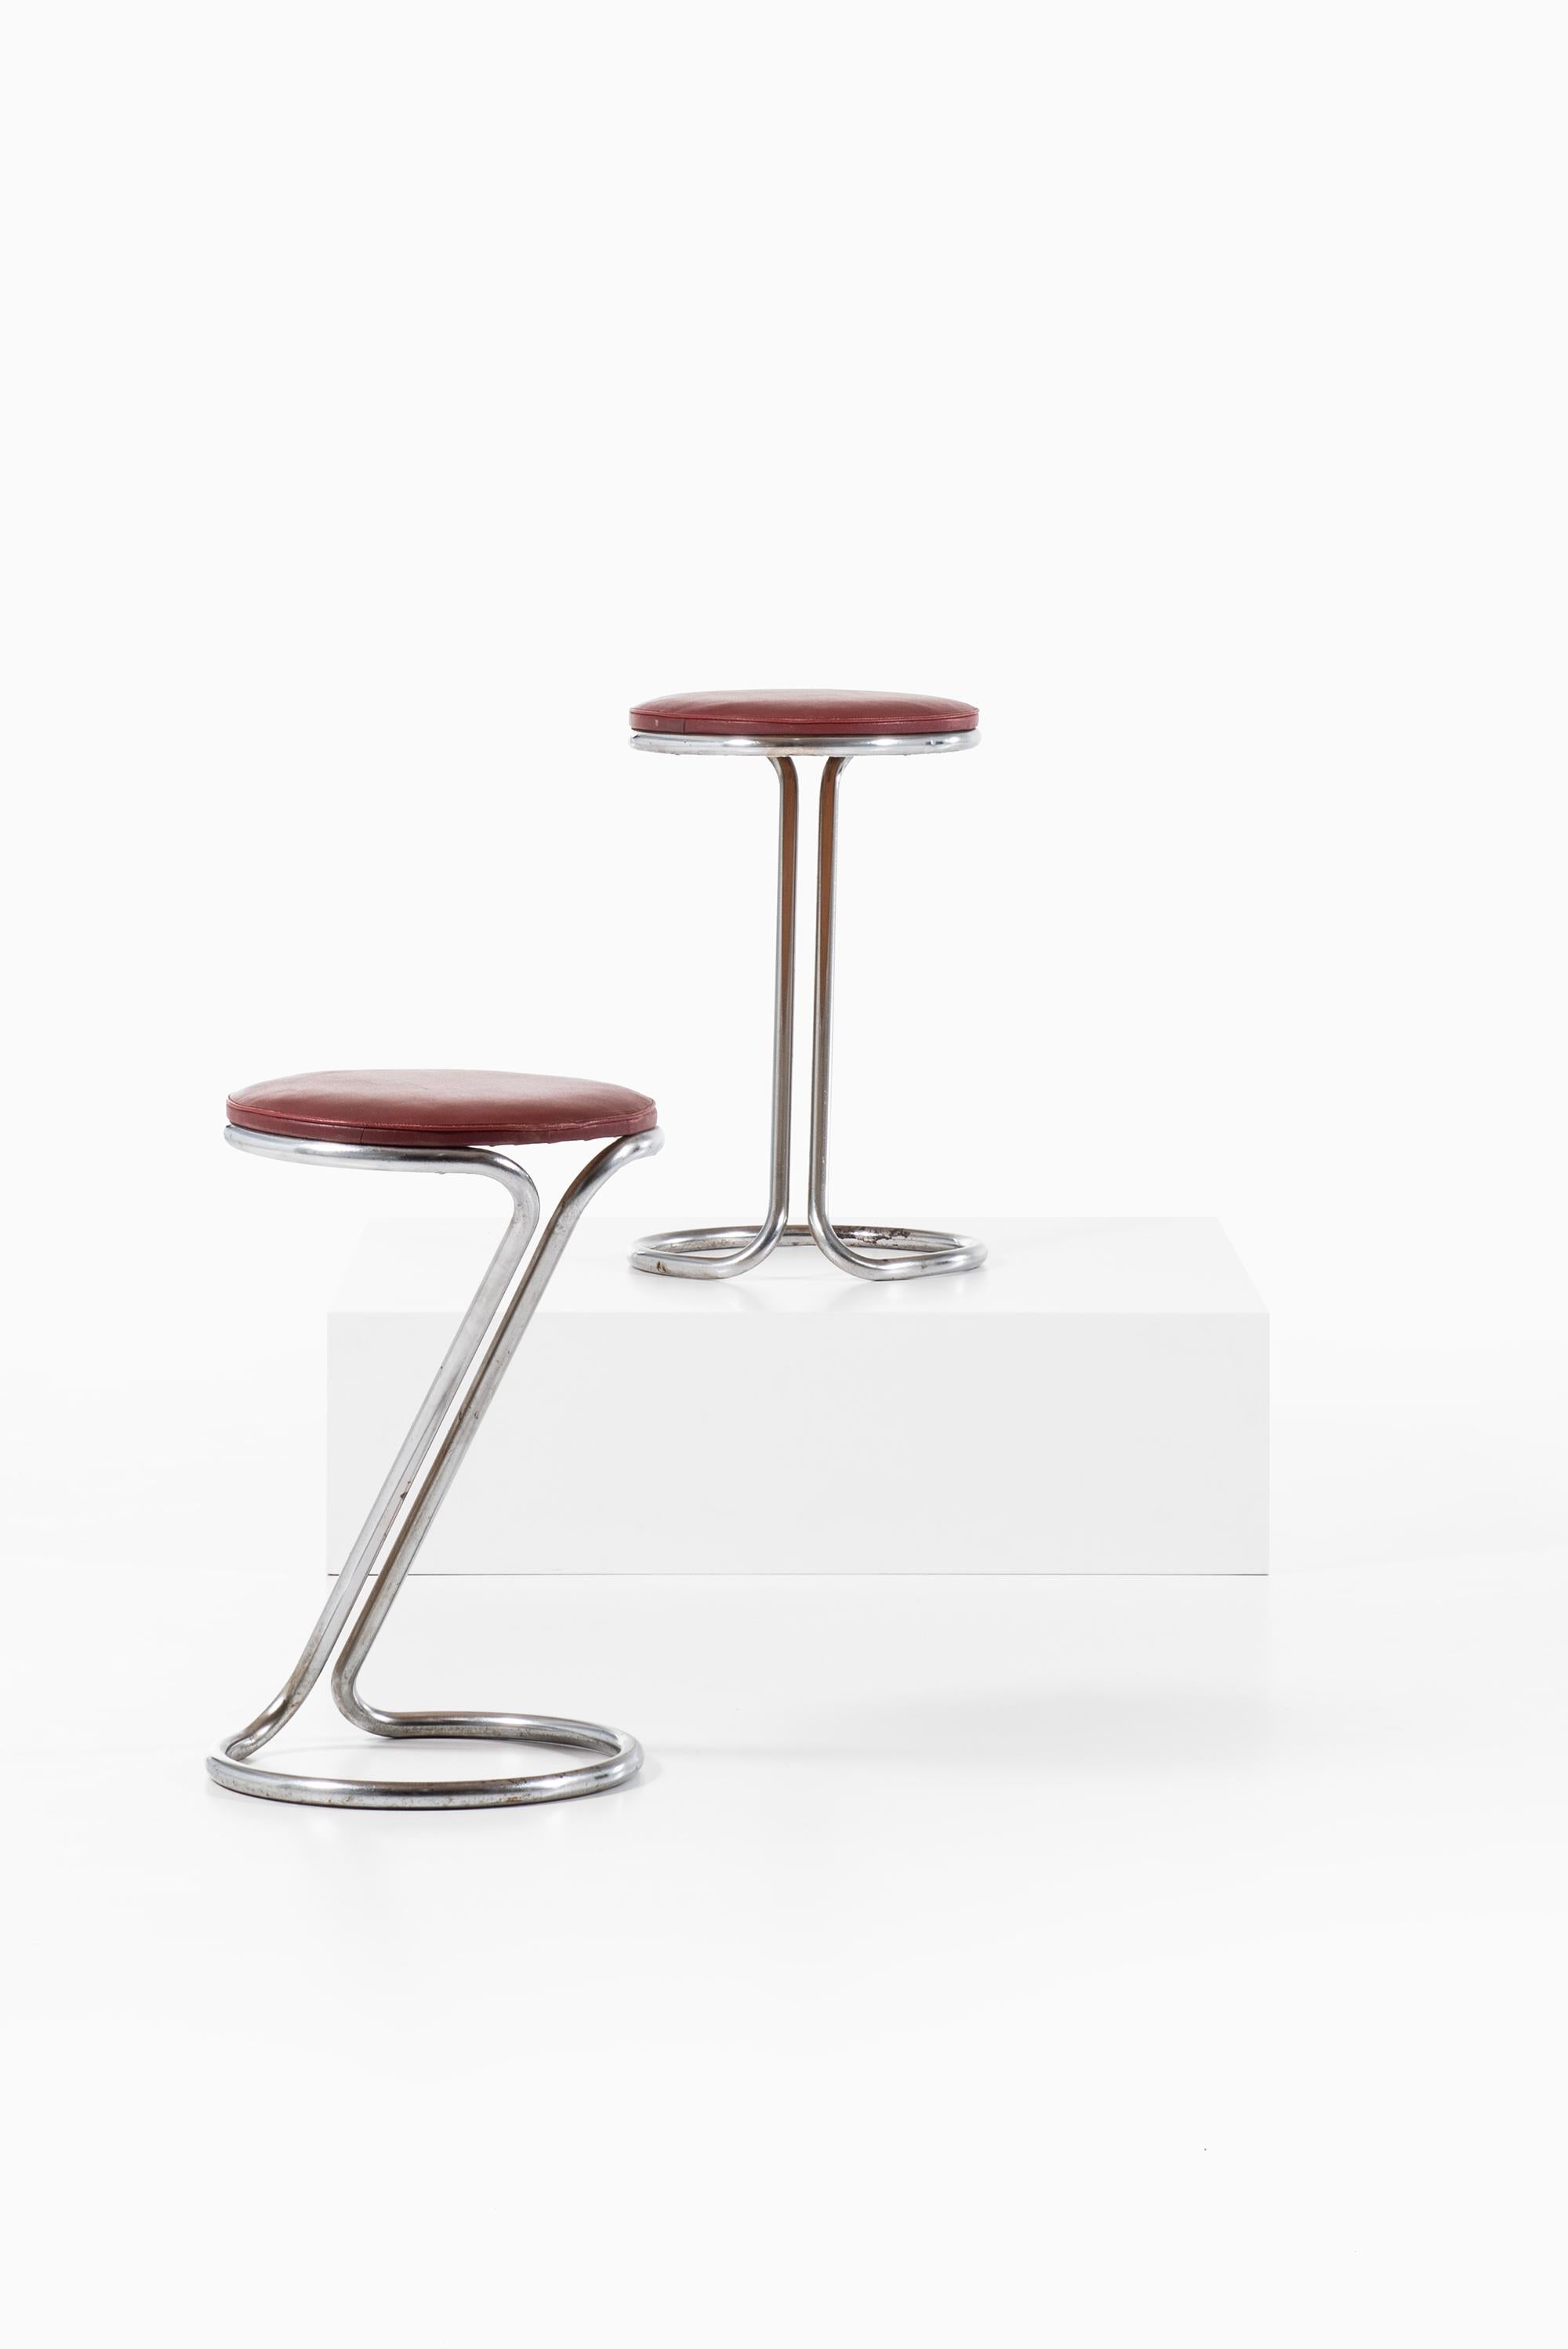 A pair of stools in the manner of Poul Henningsen. Produced in Denmark.